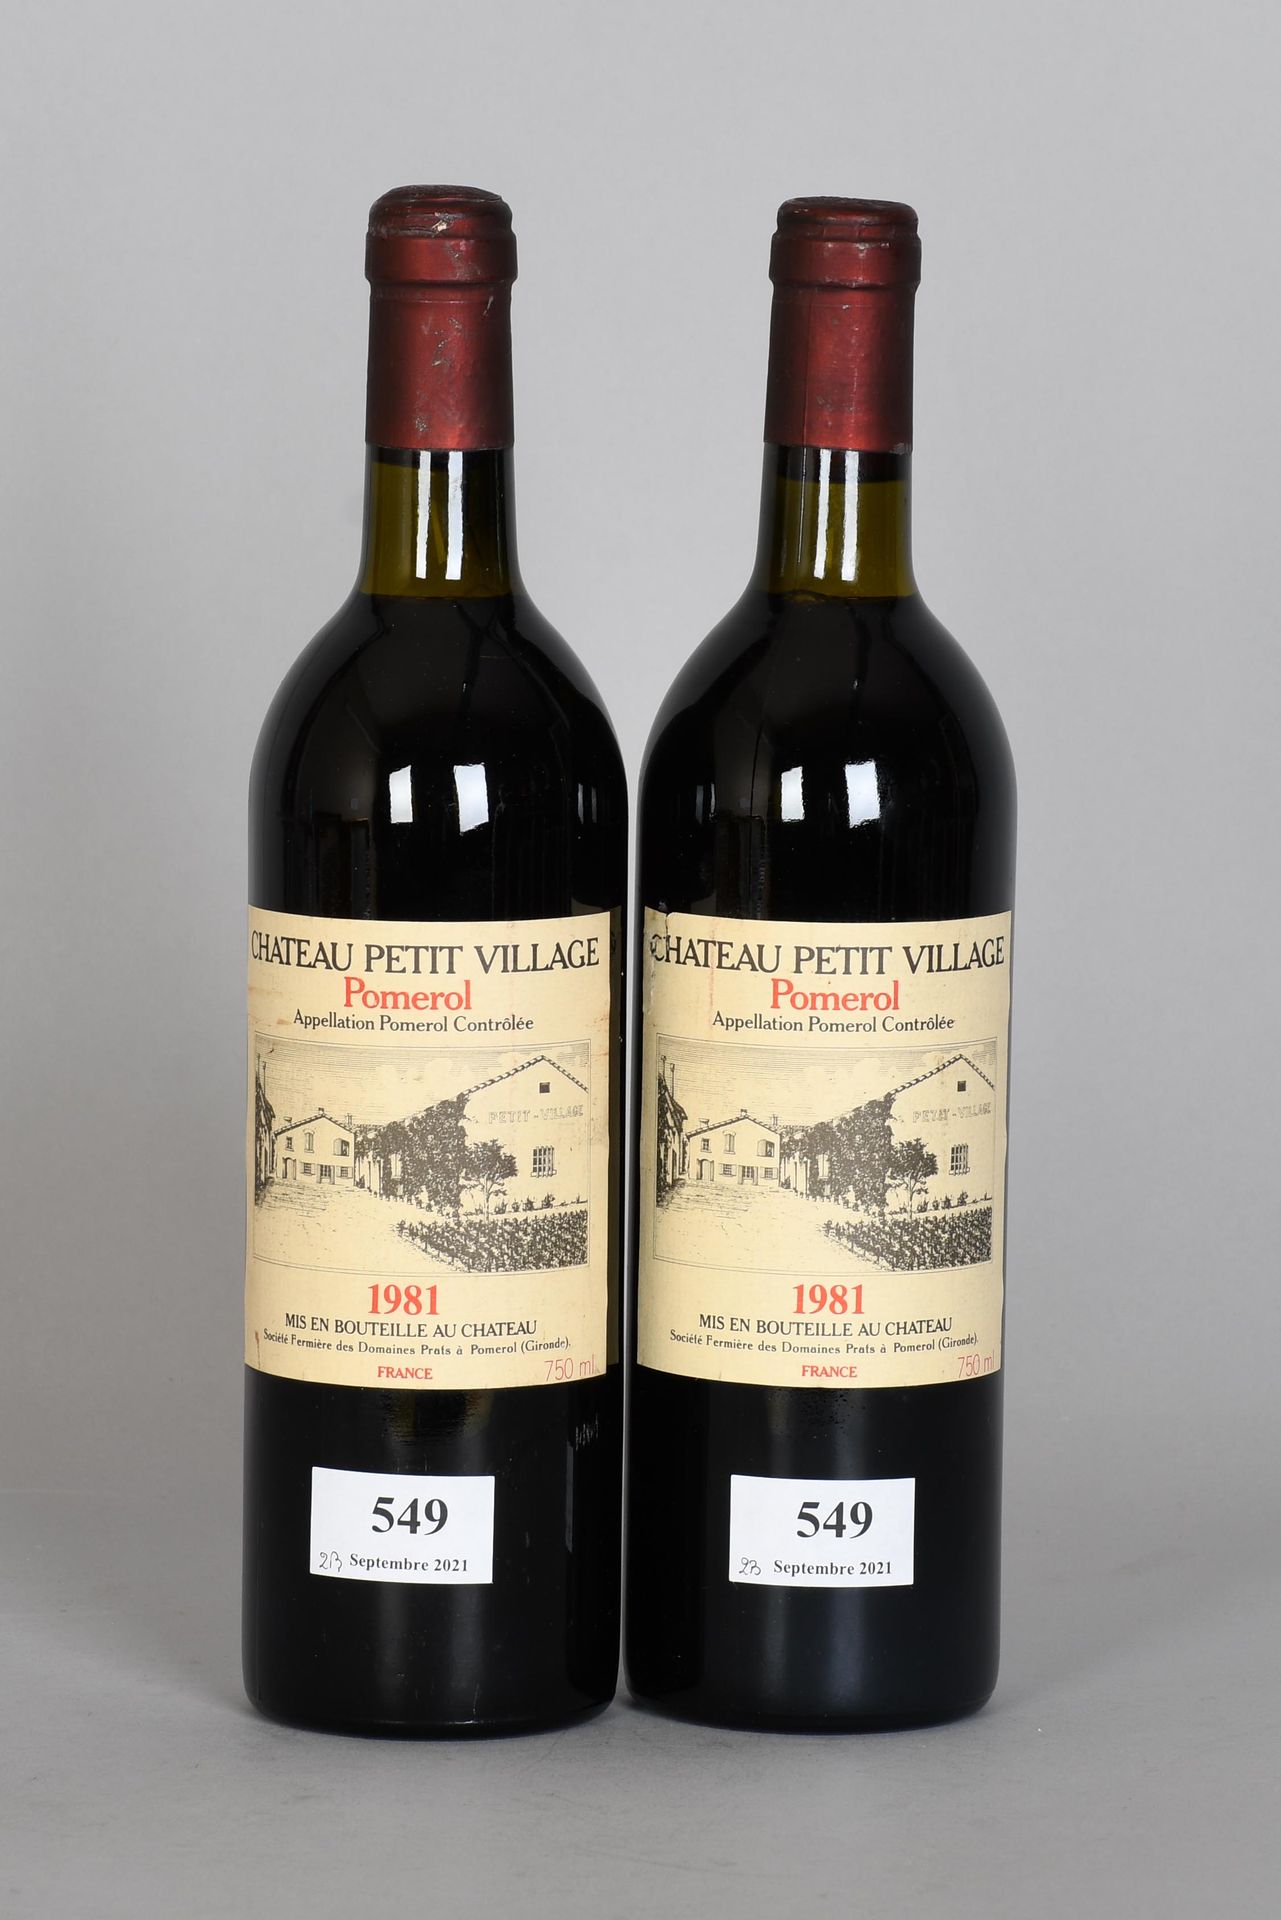 Null Château Petit Village 1981 - Chateau stake - Two bottles of wine

Pomerol. &hellip;